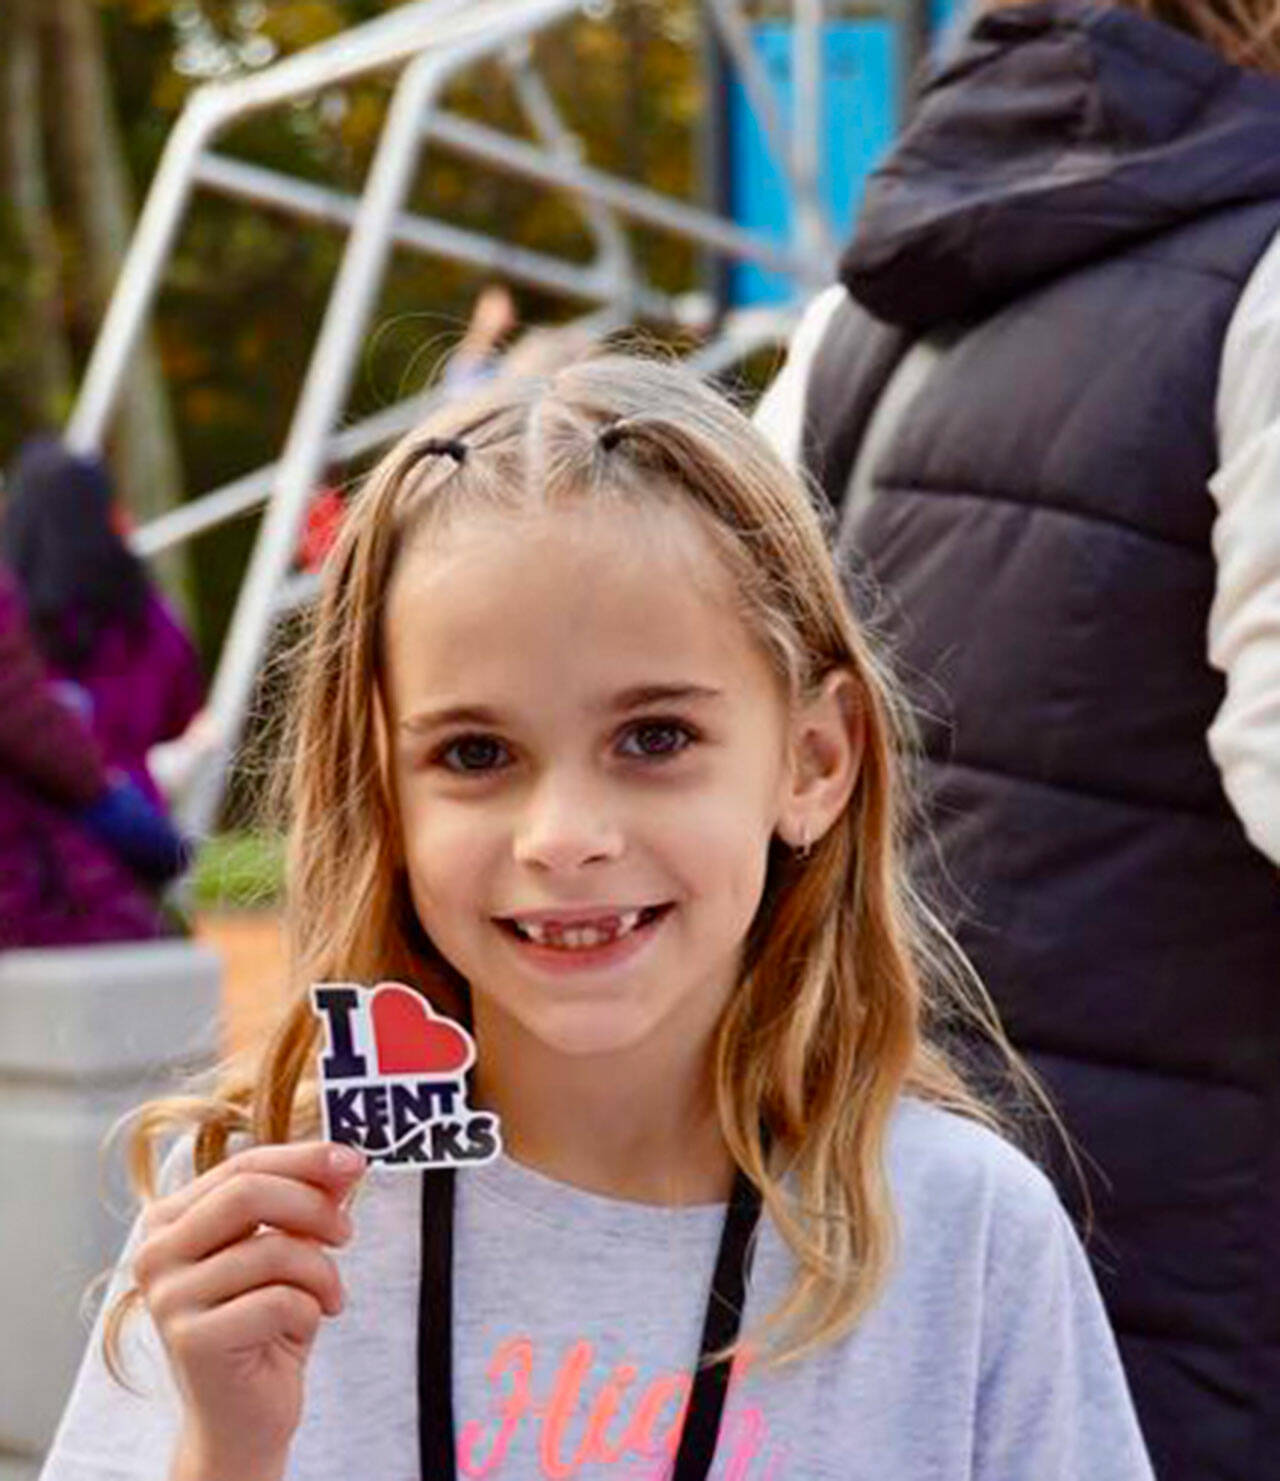 A Parkside Elementary School student shows off some swag. COURTESY PHOTO, City of Kent